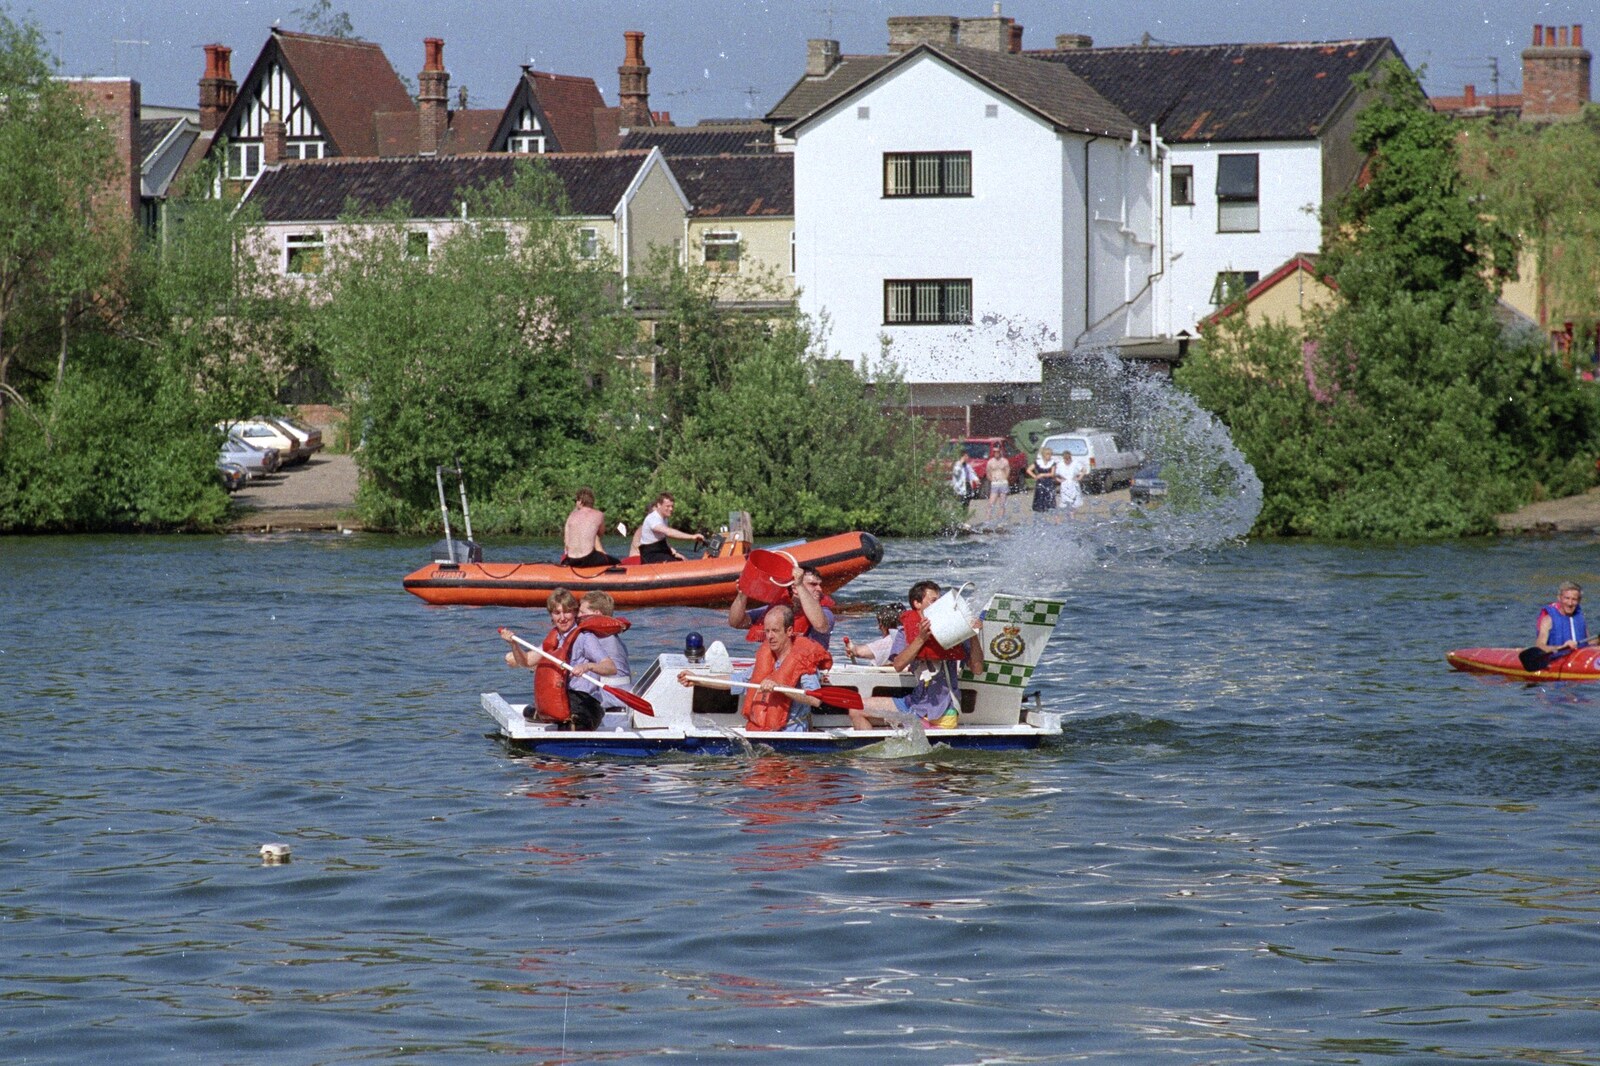 The ambulance team throws buckets of water  from The Diss Raft Race, Diss Mere, Norfolk - 6th July 1991